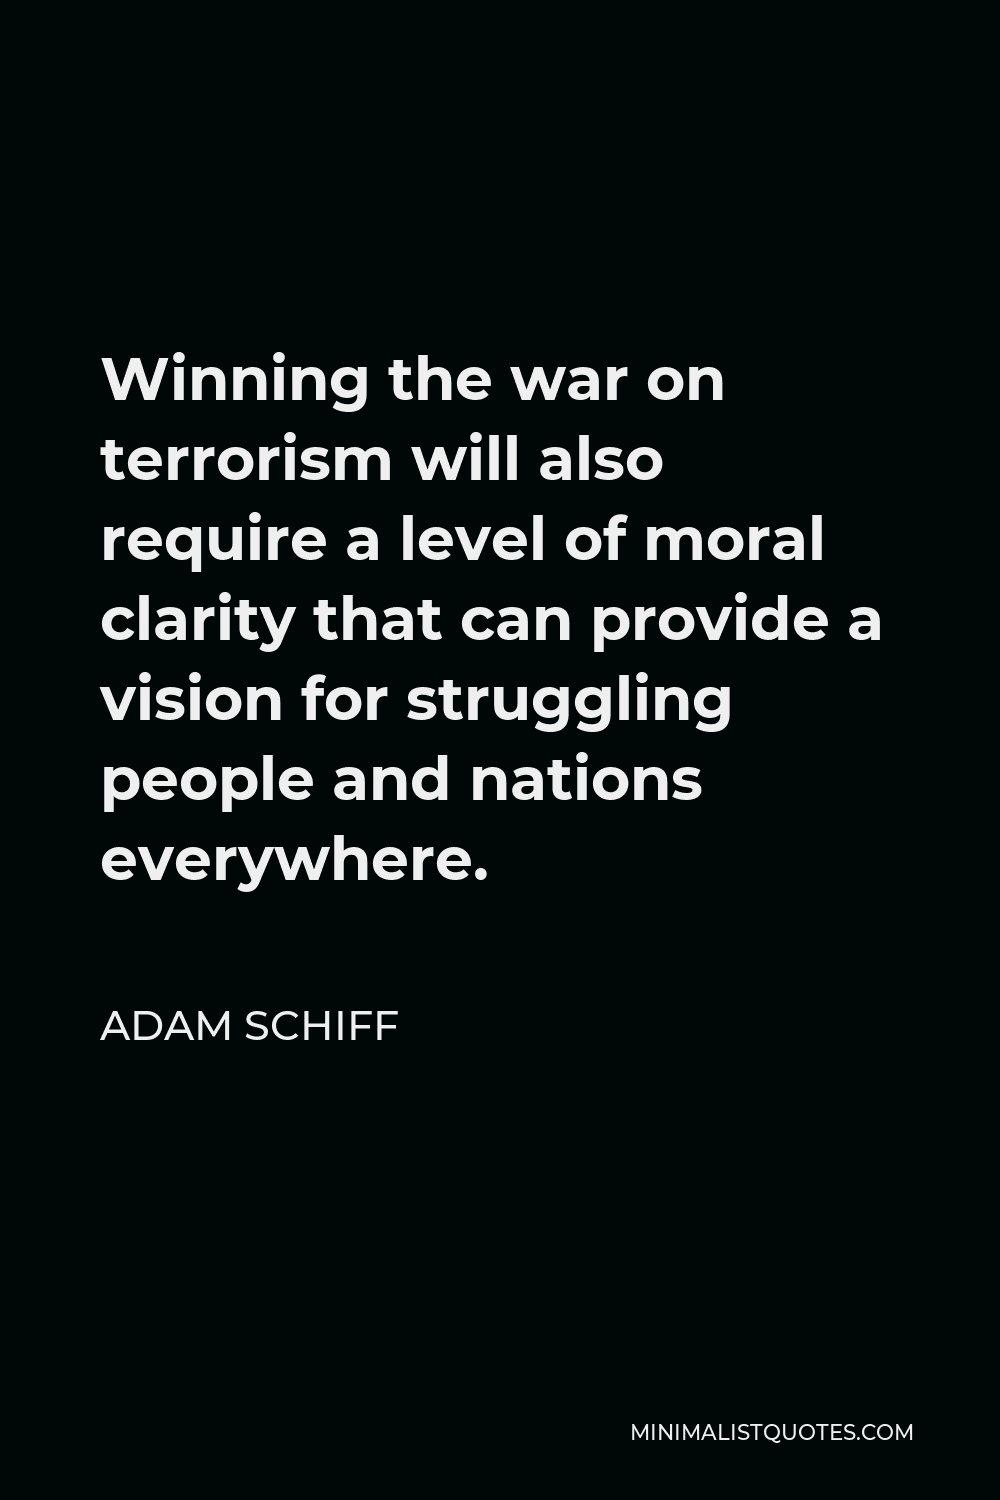 Adam Schiff Quote - Winning the war on terrorism will also require a level of moral clarity that can provide a vision for struggling people and nations everywhere.